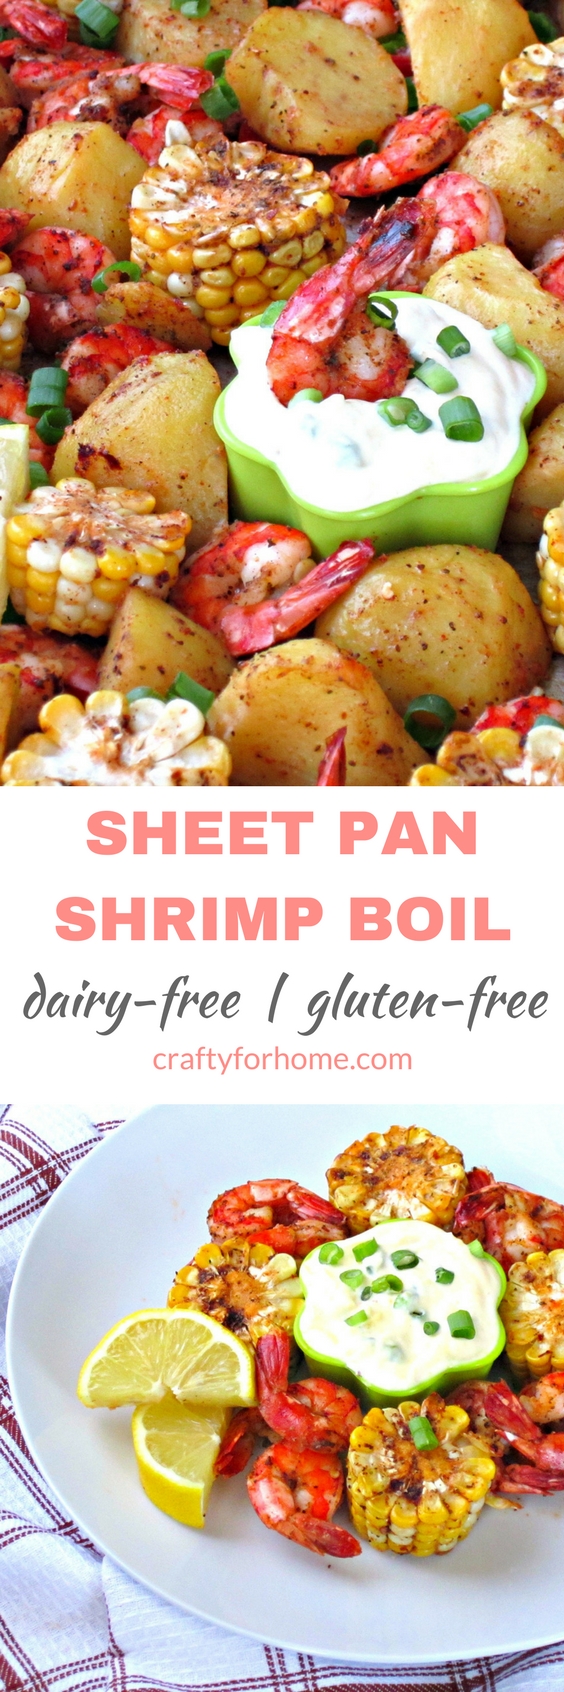 Healthy Sheet Pan Shrimp Boil Recipe, oven baked shrimp boil with homemade seasoning mix perfect for the crowd summer dinner party #shrimpboil #sheetpan #mealprep, recipe on craftyforhome.com 